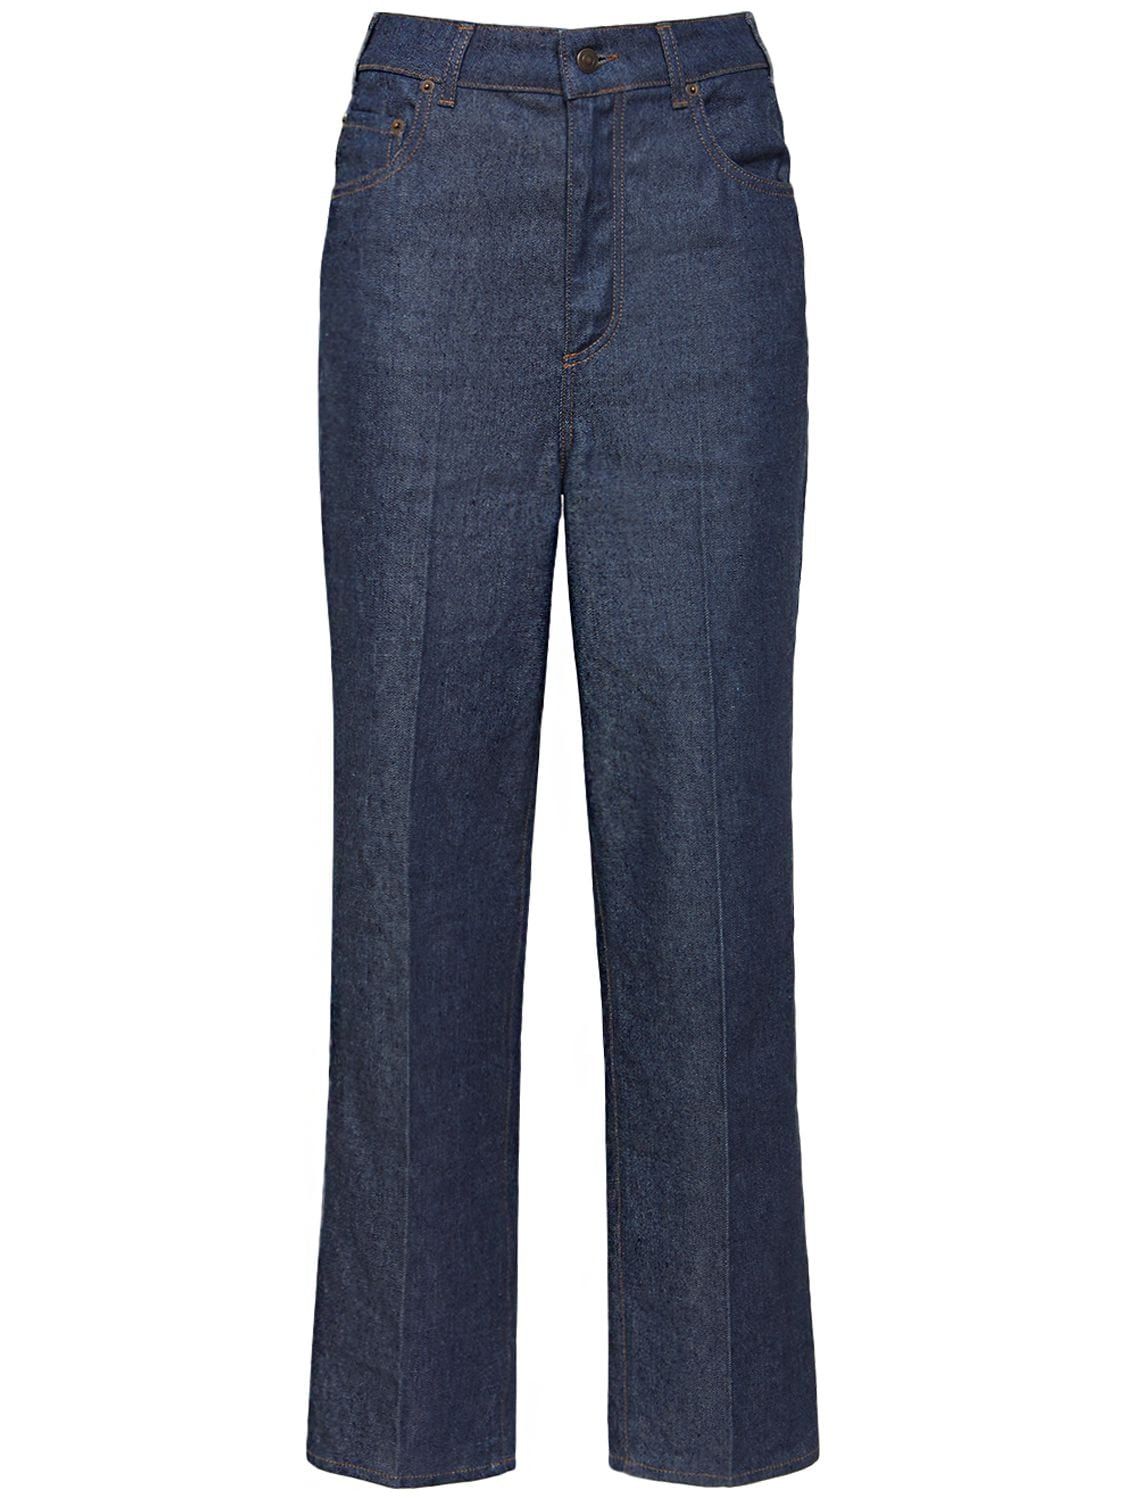 Image of Madley Cotton & Linen Straight Jeans